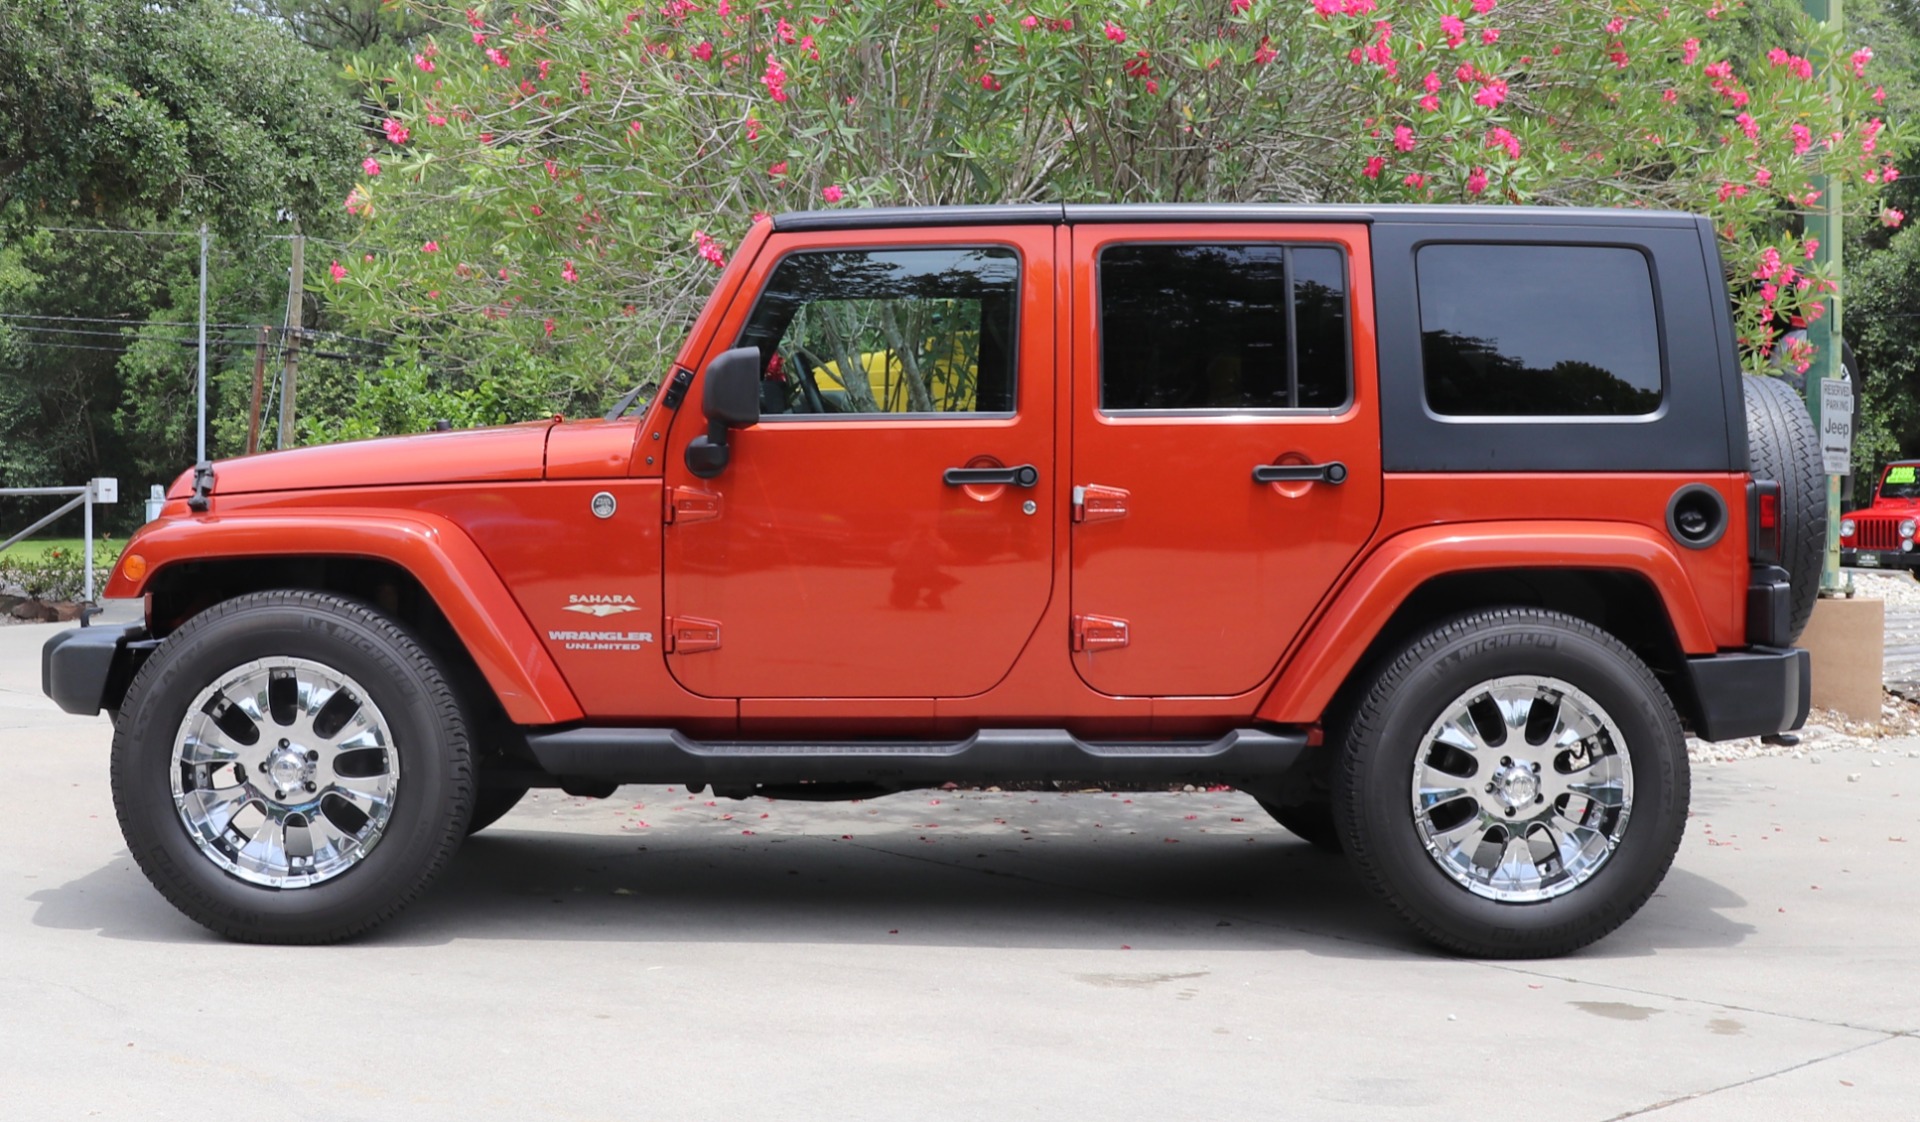 Used 2009 Jeep Wrangler Unlimited Sahara For Sale ($15,995) | Select Jeeps  Inc. Stock #713666